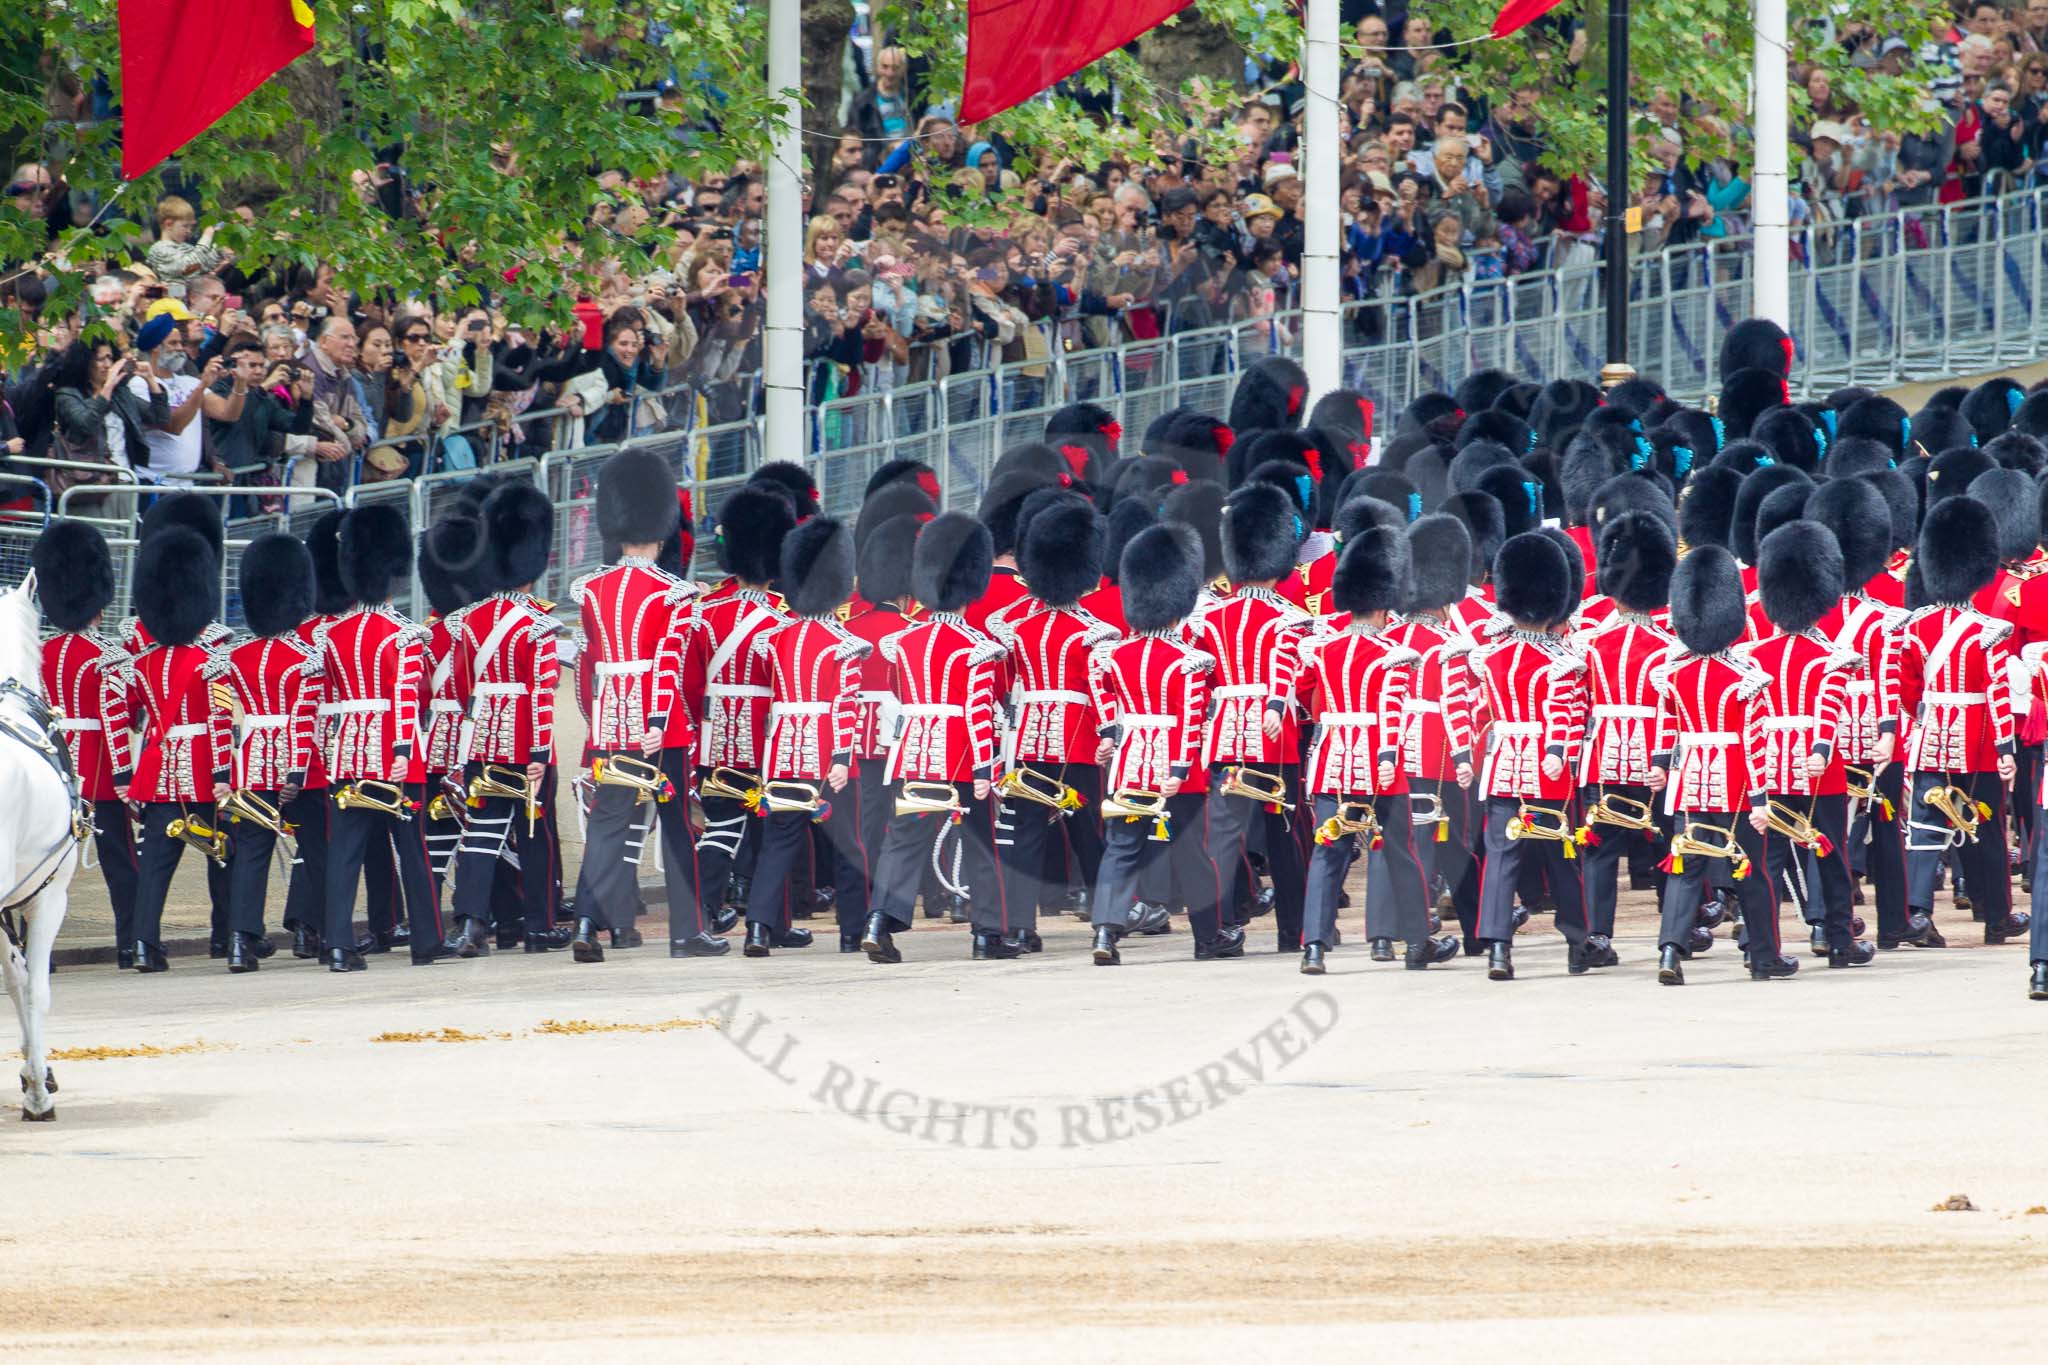 Major General's Review 2013: The March Off - the Massed Bands are leaving towards The Mall, followed by the coach that will carry HM The Queen and HRH The Duke of Kent..
Horse Guards Parade, Westminster,
London SW1,

United Kingdom,
on 01 June 2013 at 12:09, image #720